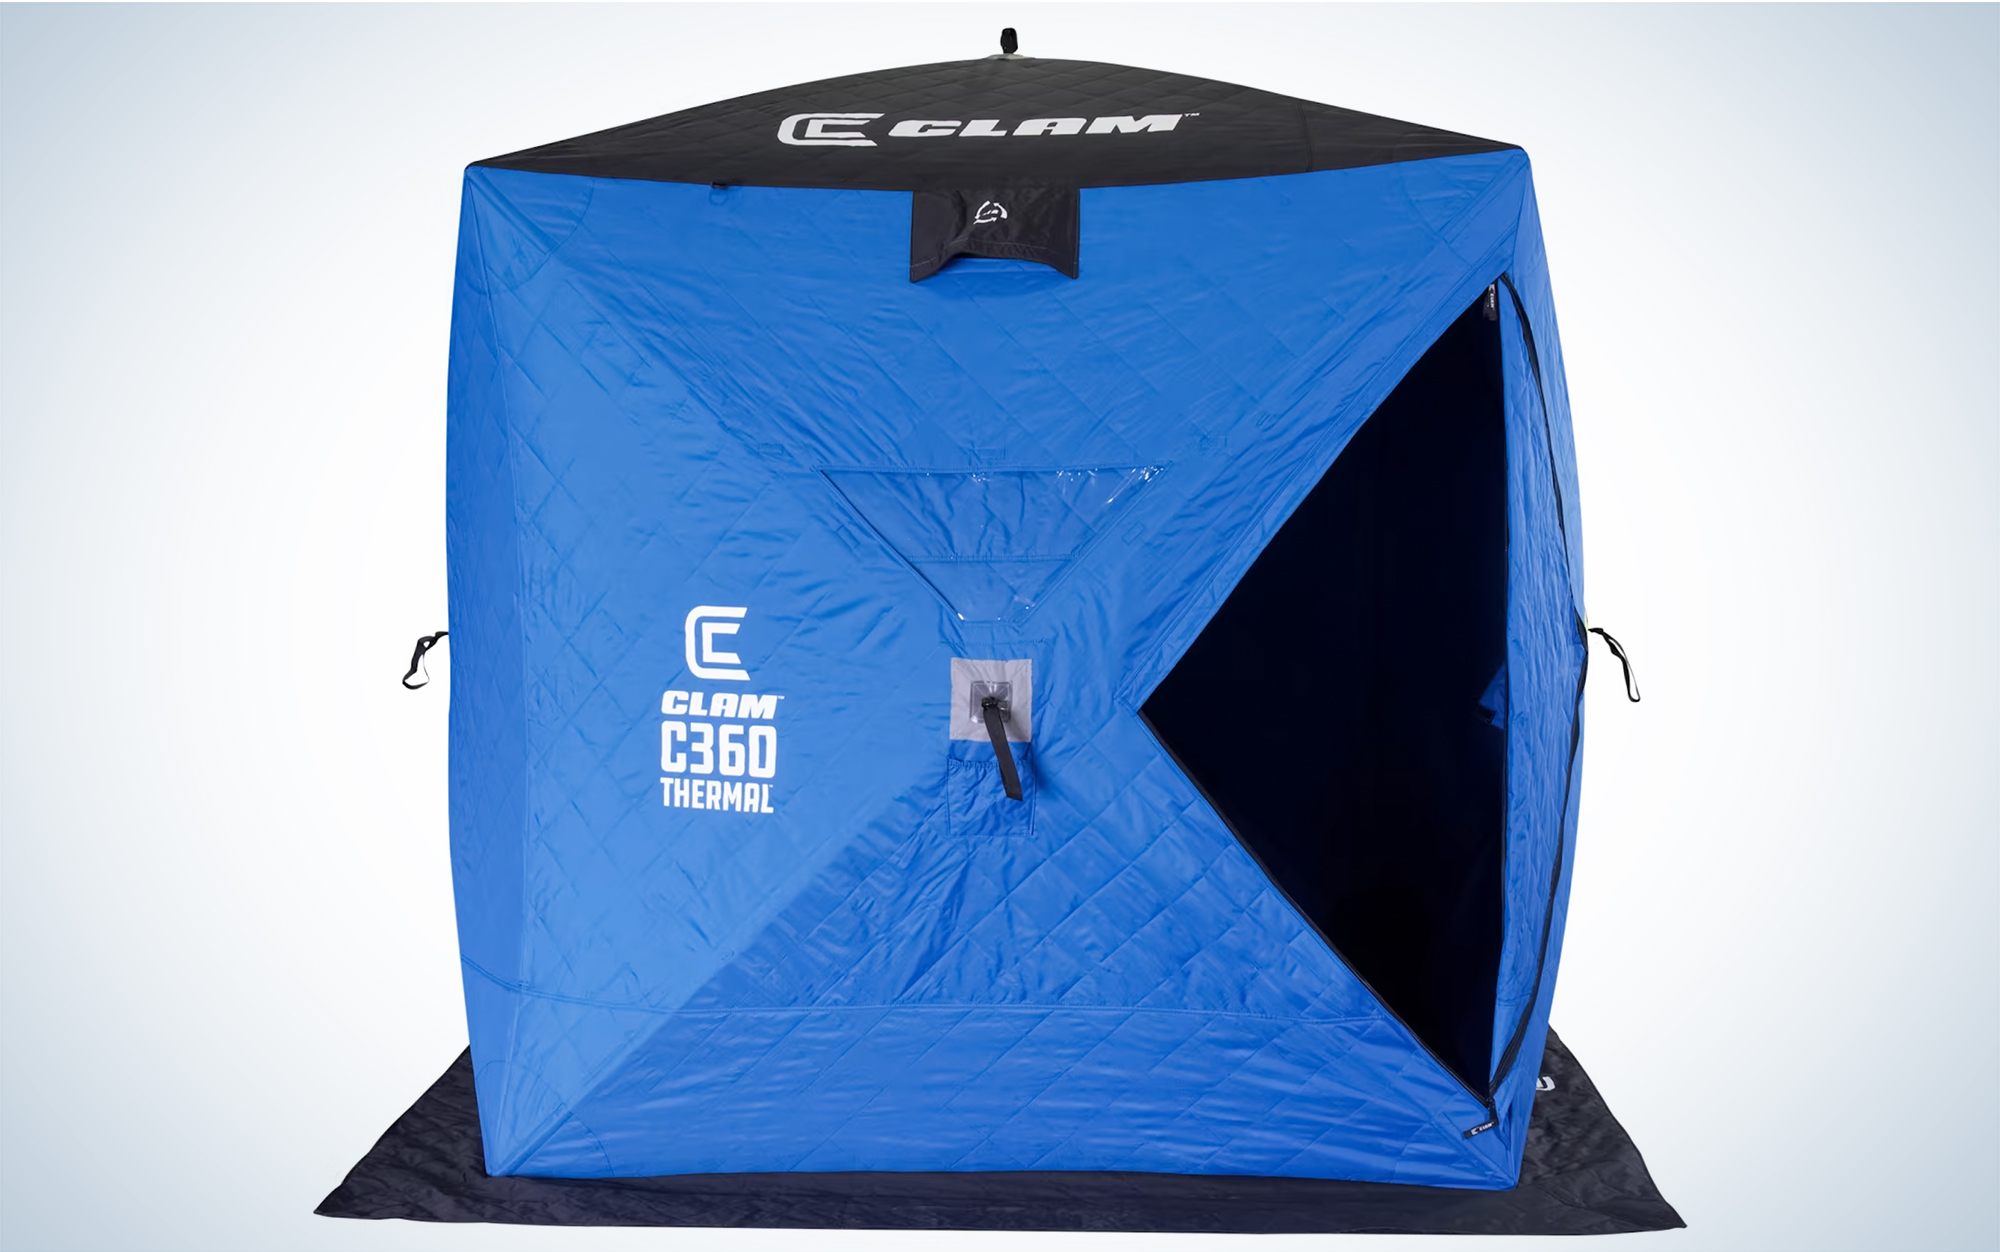 The Clam C-360 Thermal Hub Ice Shelter is on sale.